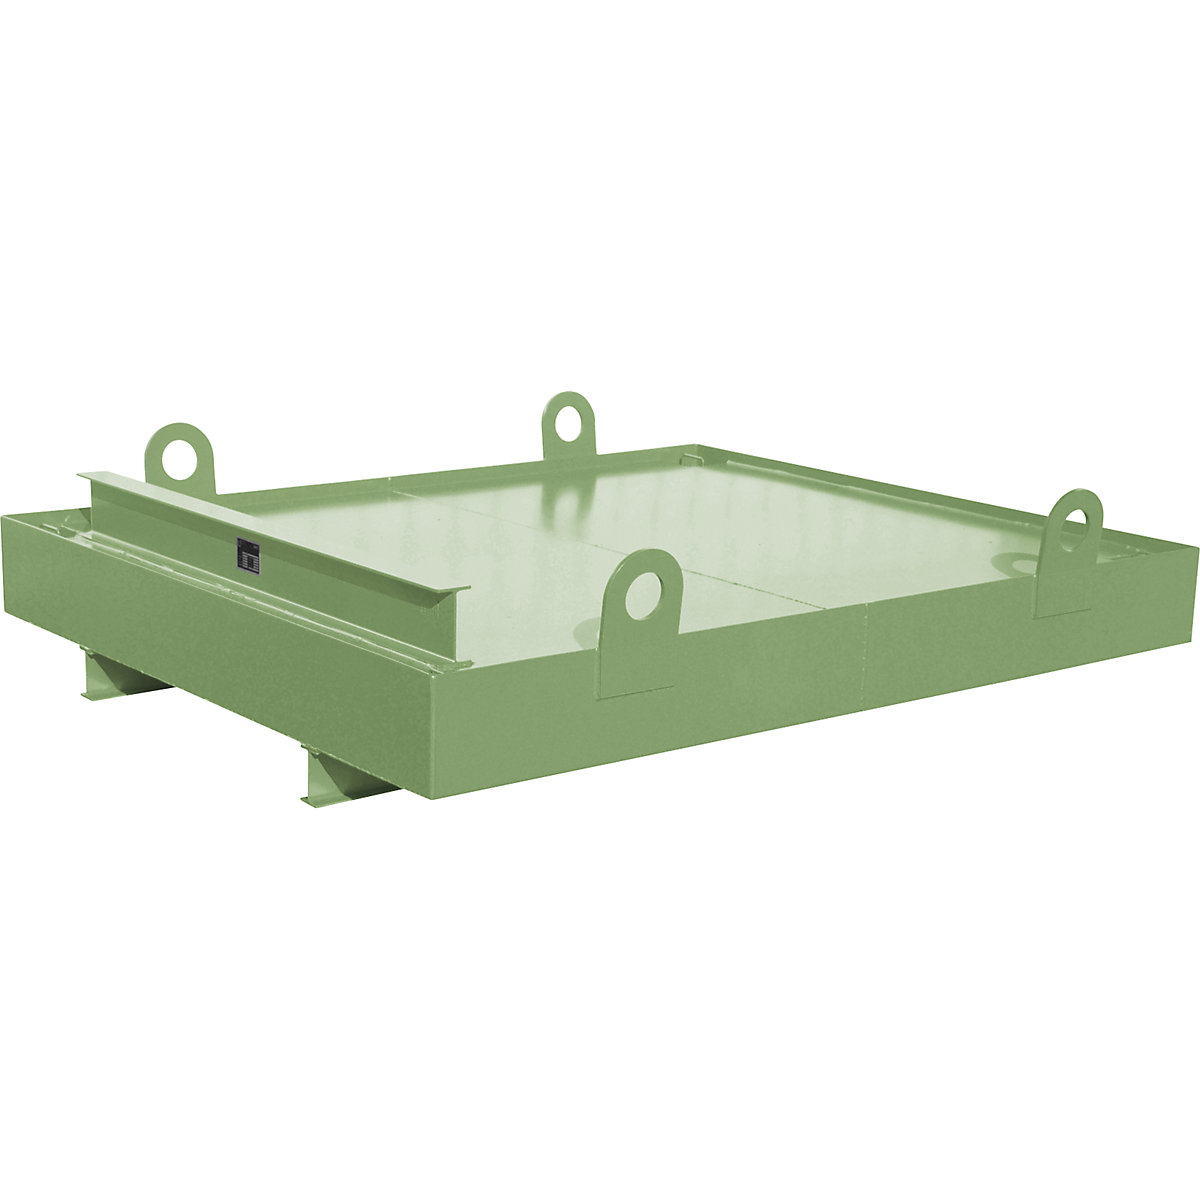 Sump tray for skip trailer – eurokraft pro, for skip trailers, sump capacity 880 l, green-6